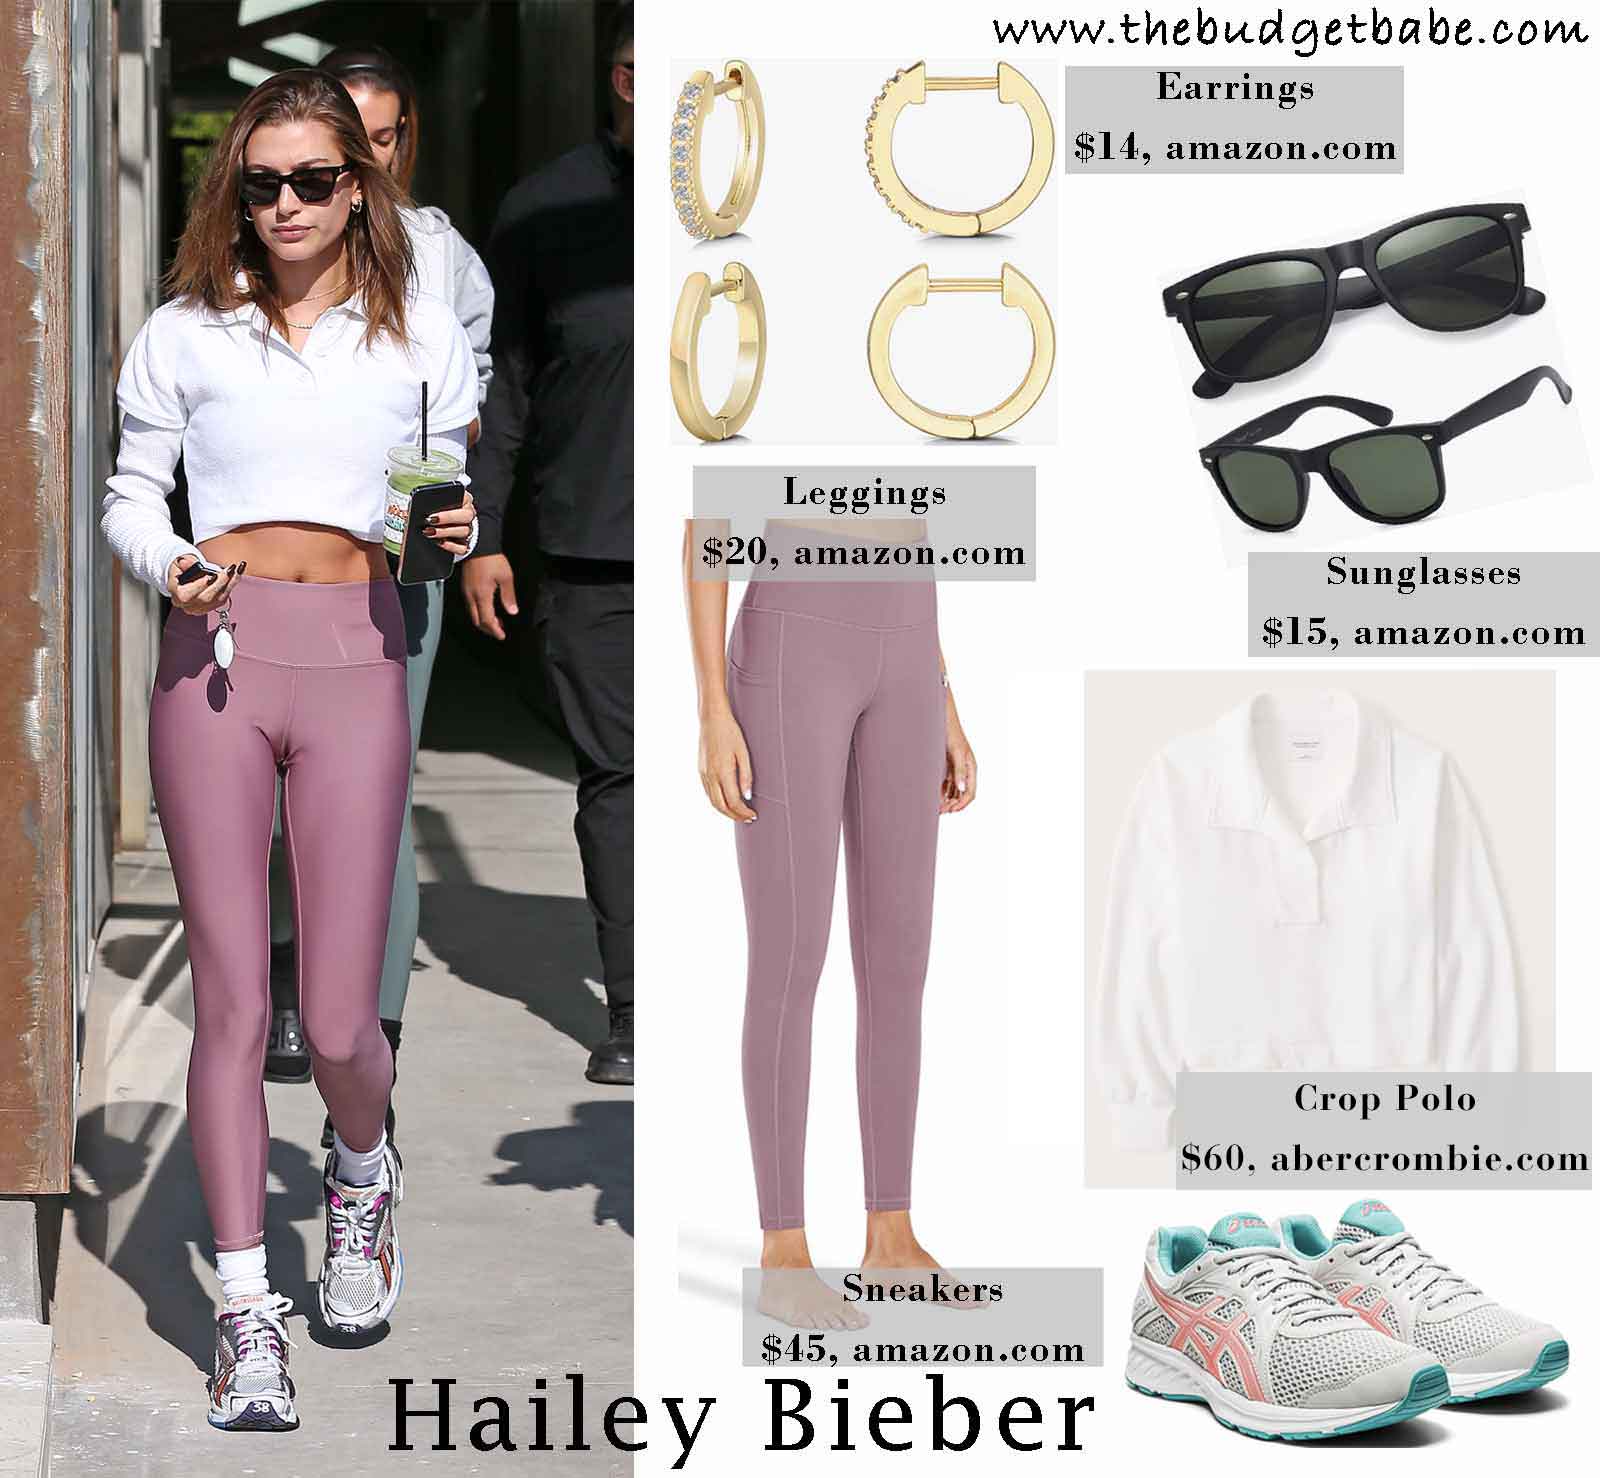 Hailey Bieber's Mauve Leggings and Cropped Polo Look for Less